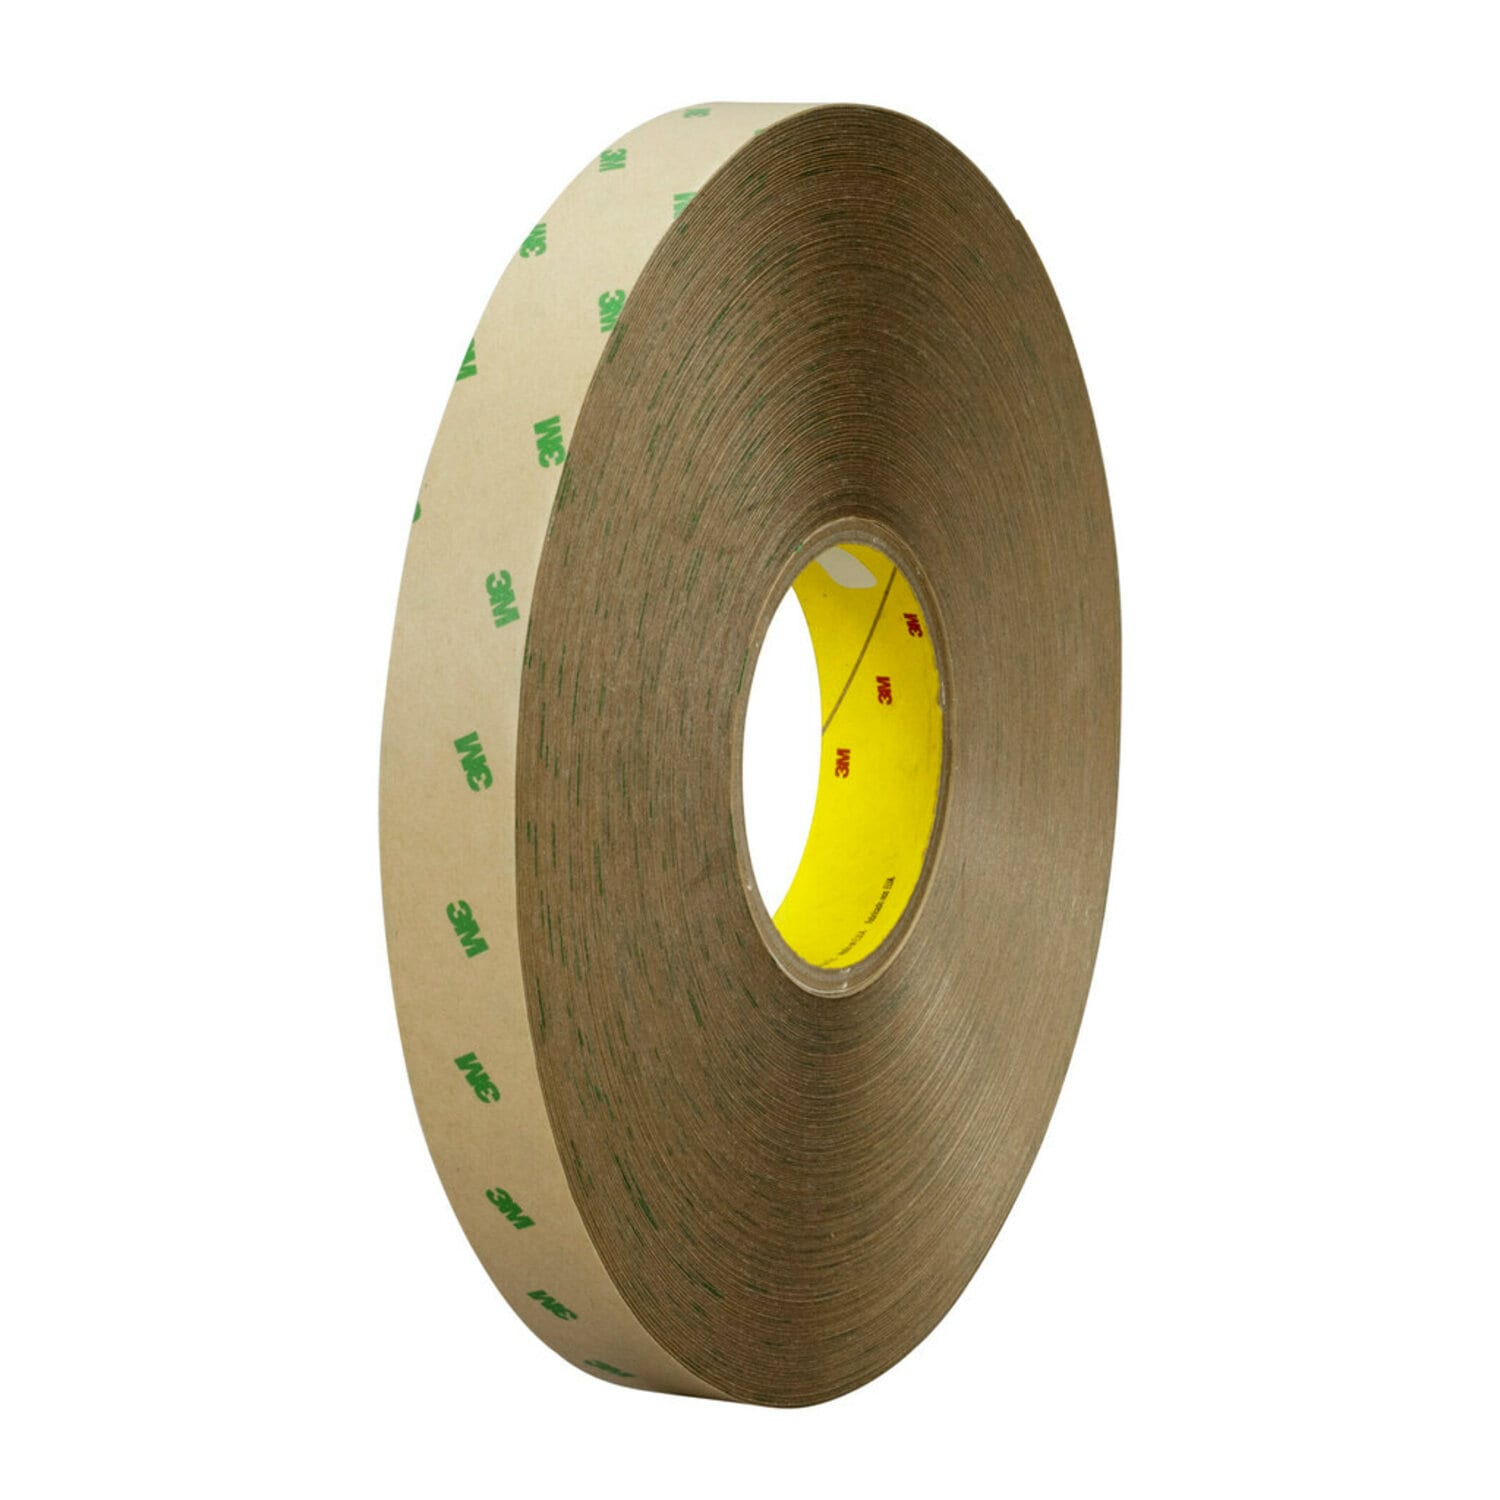 7000123644 - 3M Adhesive Transfer Tape 9505, Clear, 48 in x 180 yd, 5 mil, 1 roll
per case